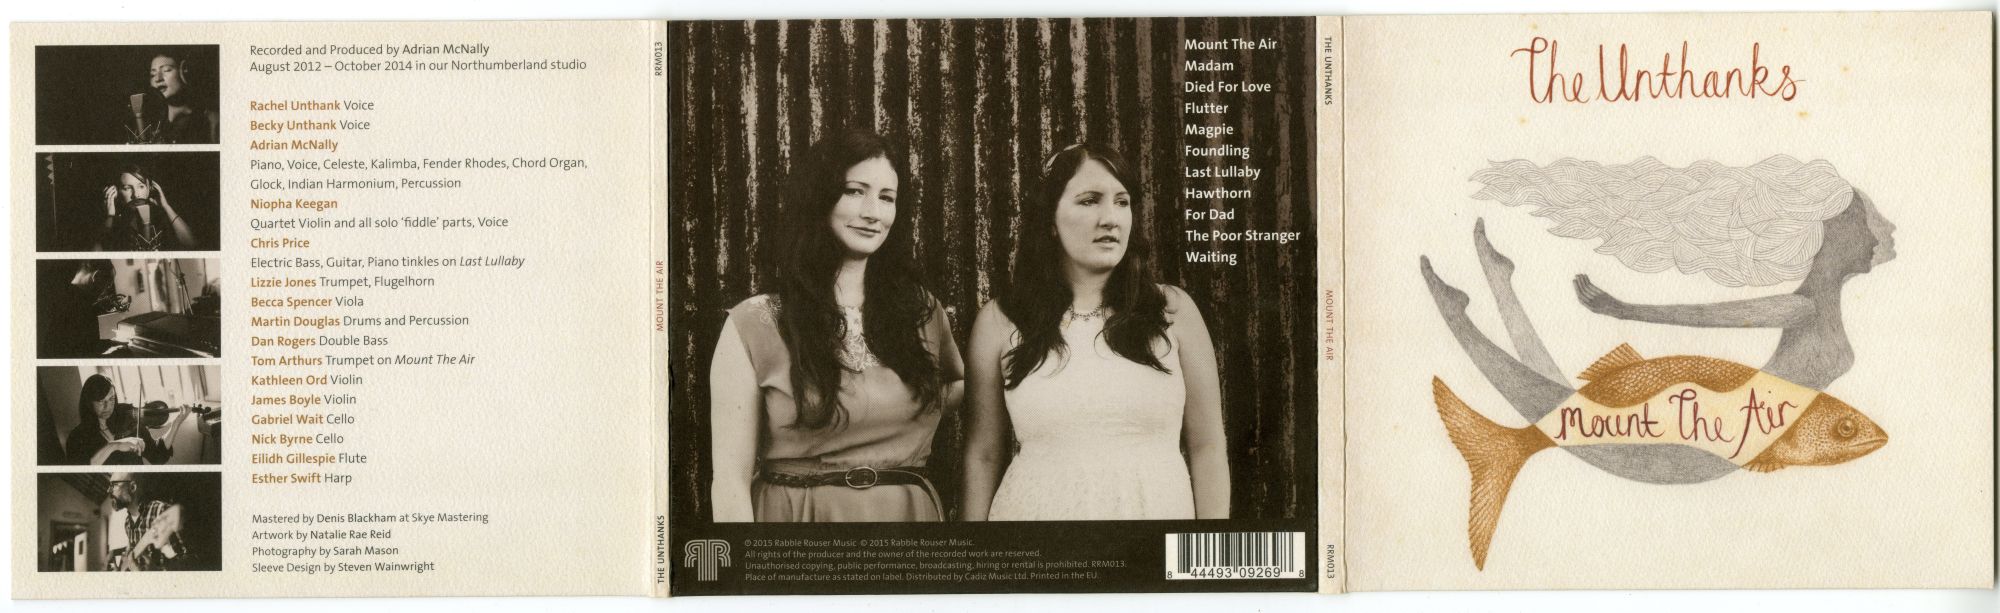 The Unthanks『Mount The Air』01